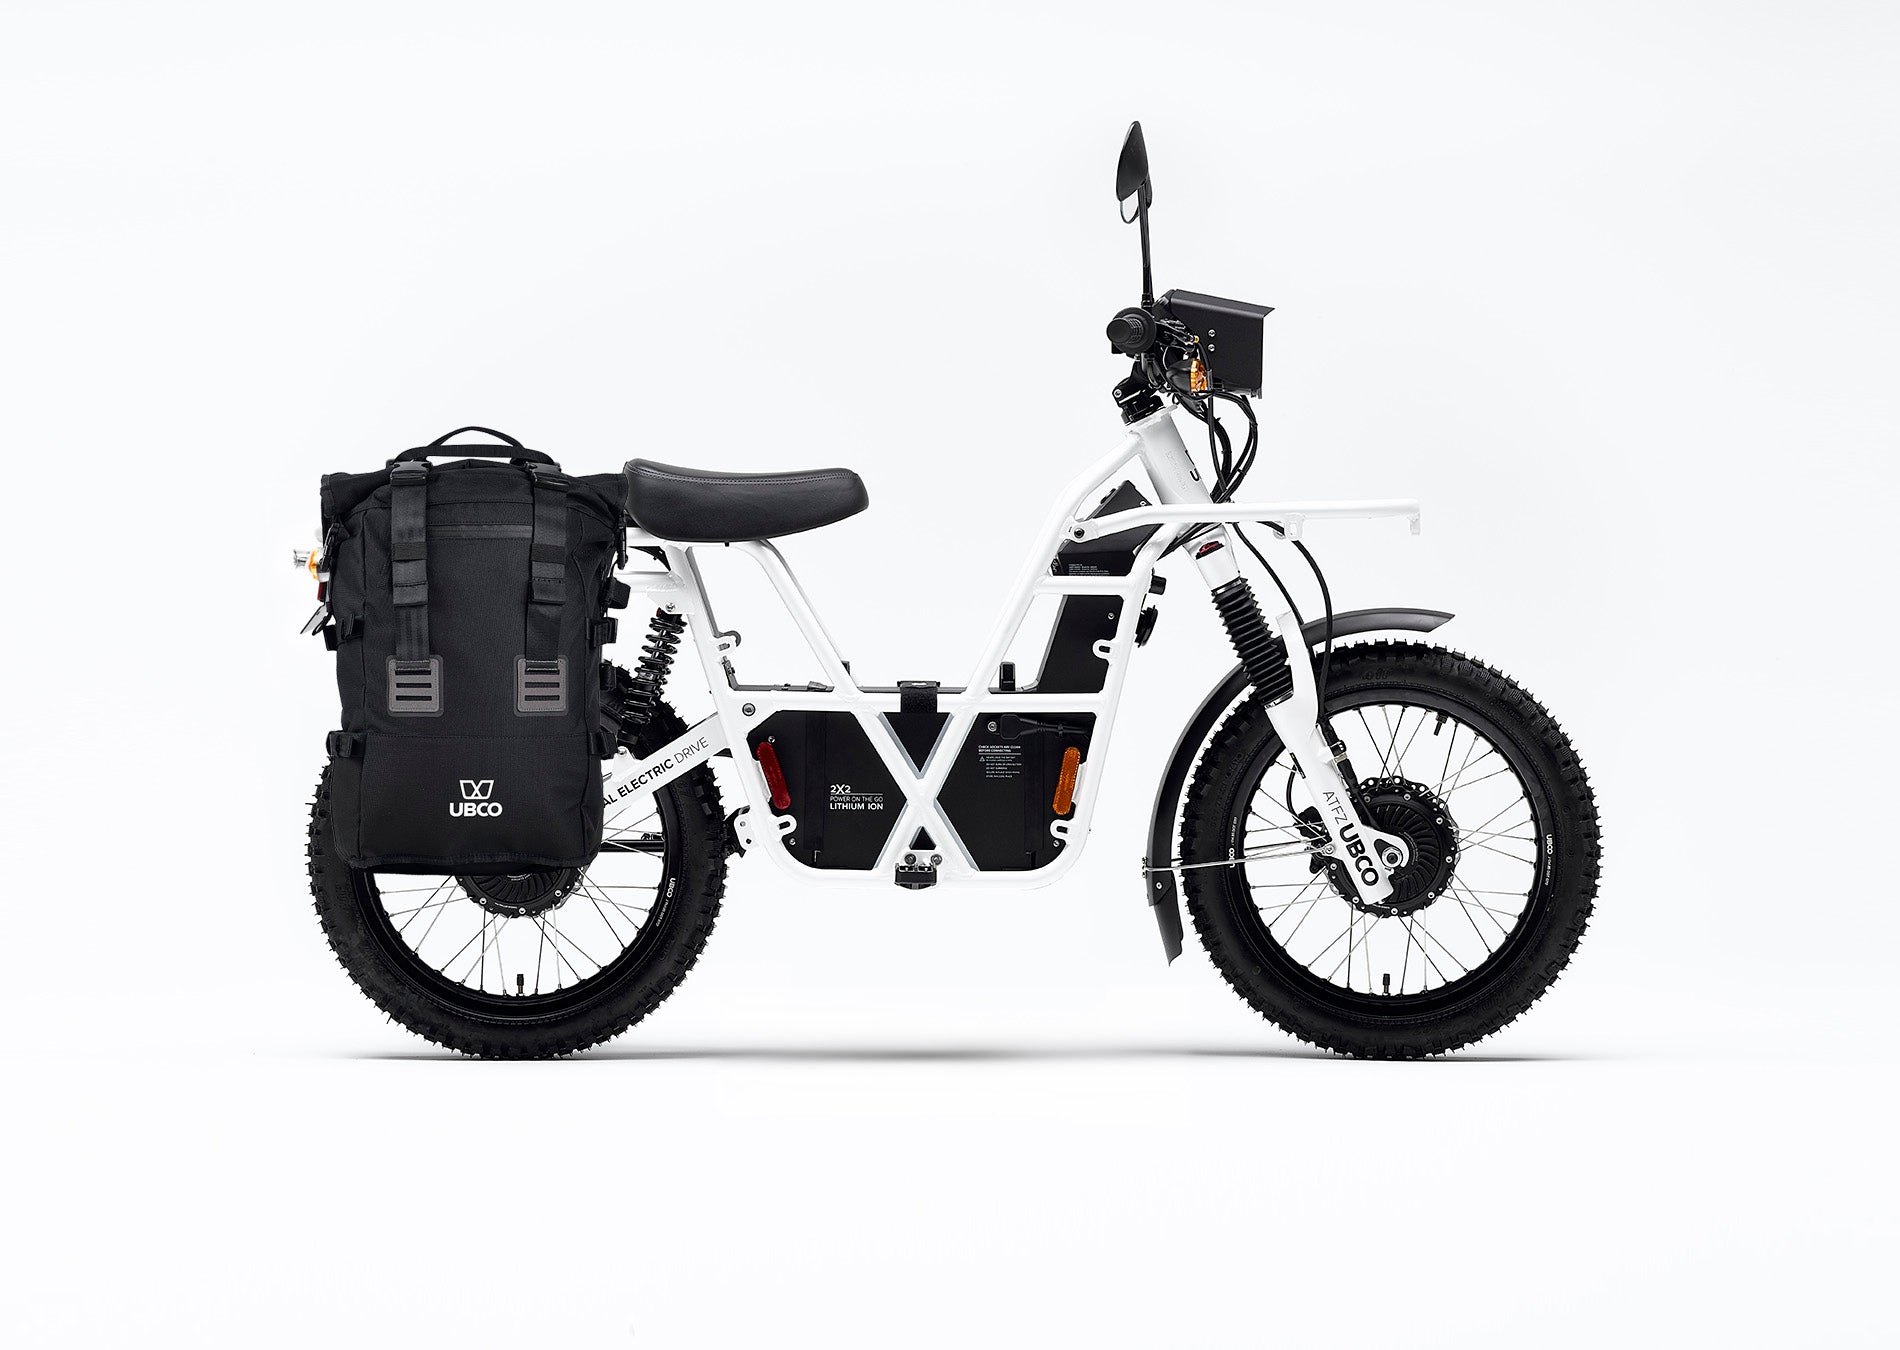 Side view of Ubco 2x2 2018 electric adventure bike with pannier bags mounted on either side of rear wheel